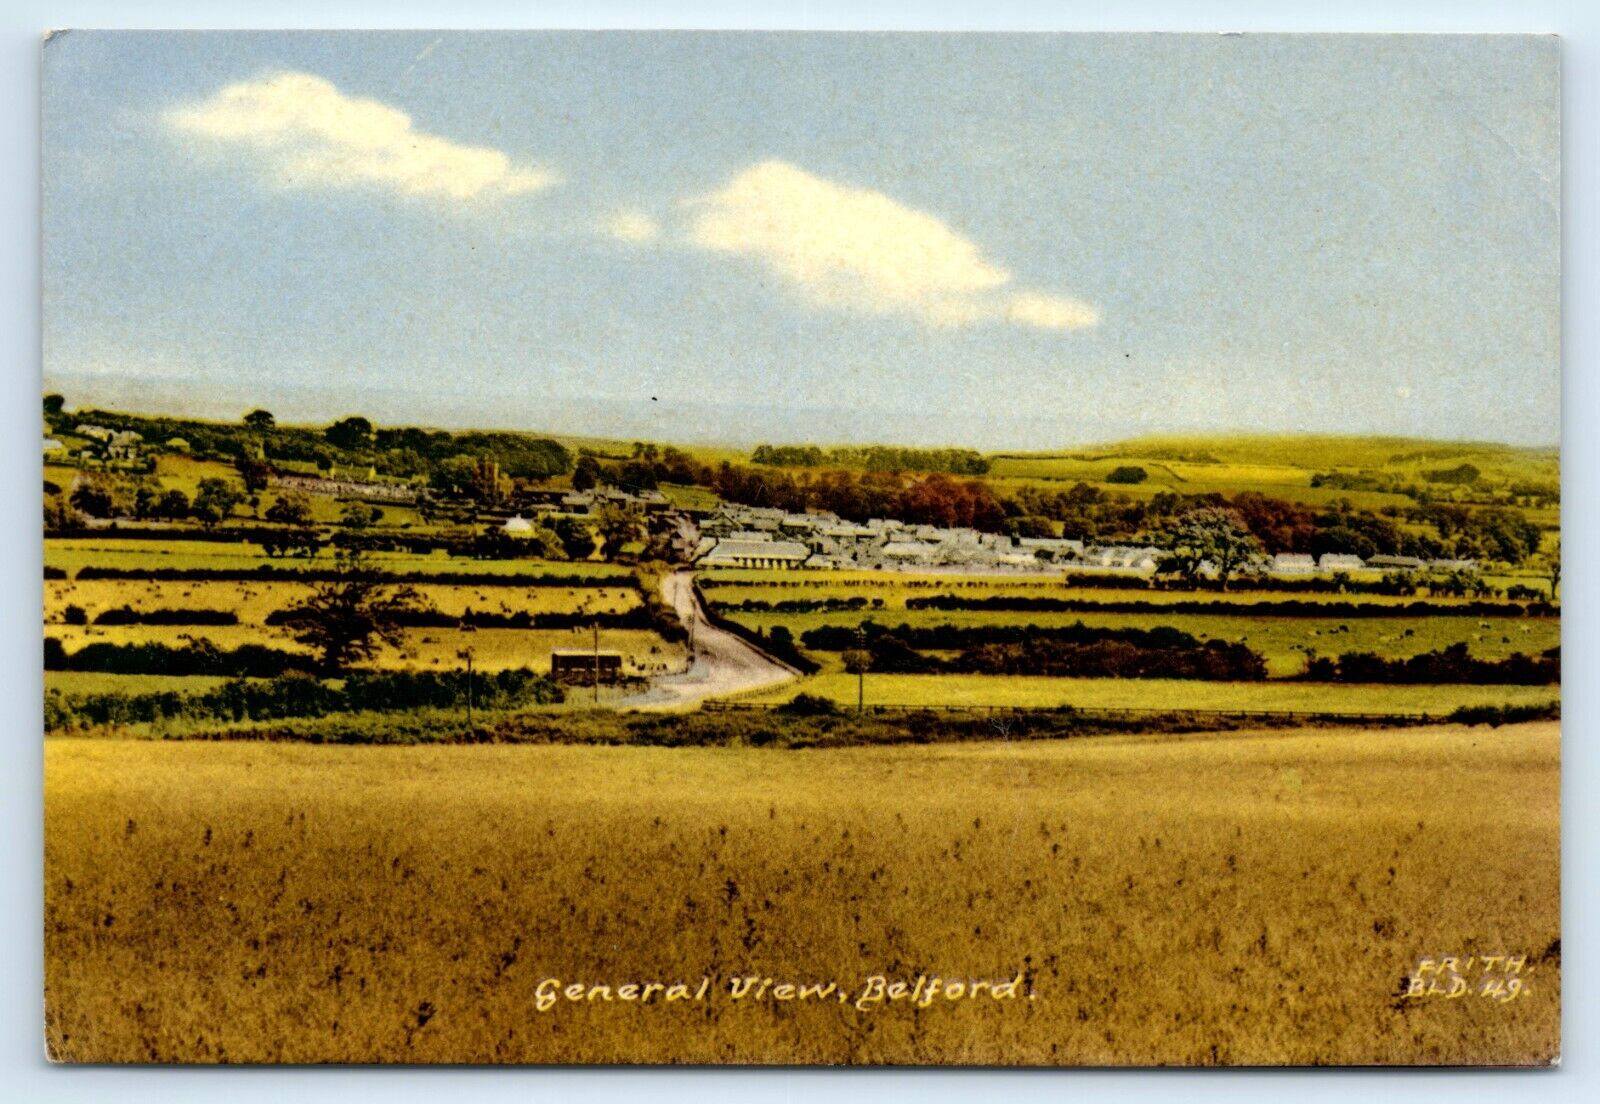 House Clearance - POSTCARD BELFORD GENERAL VIEW - NORTHUMBERLAND - 1970